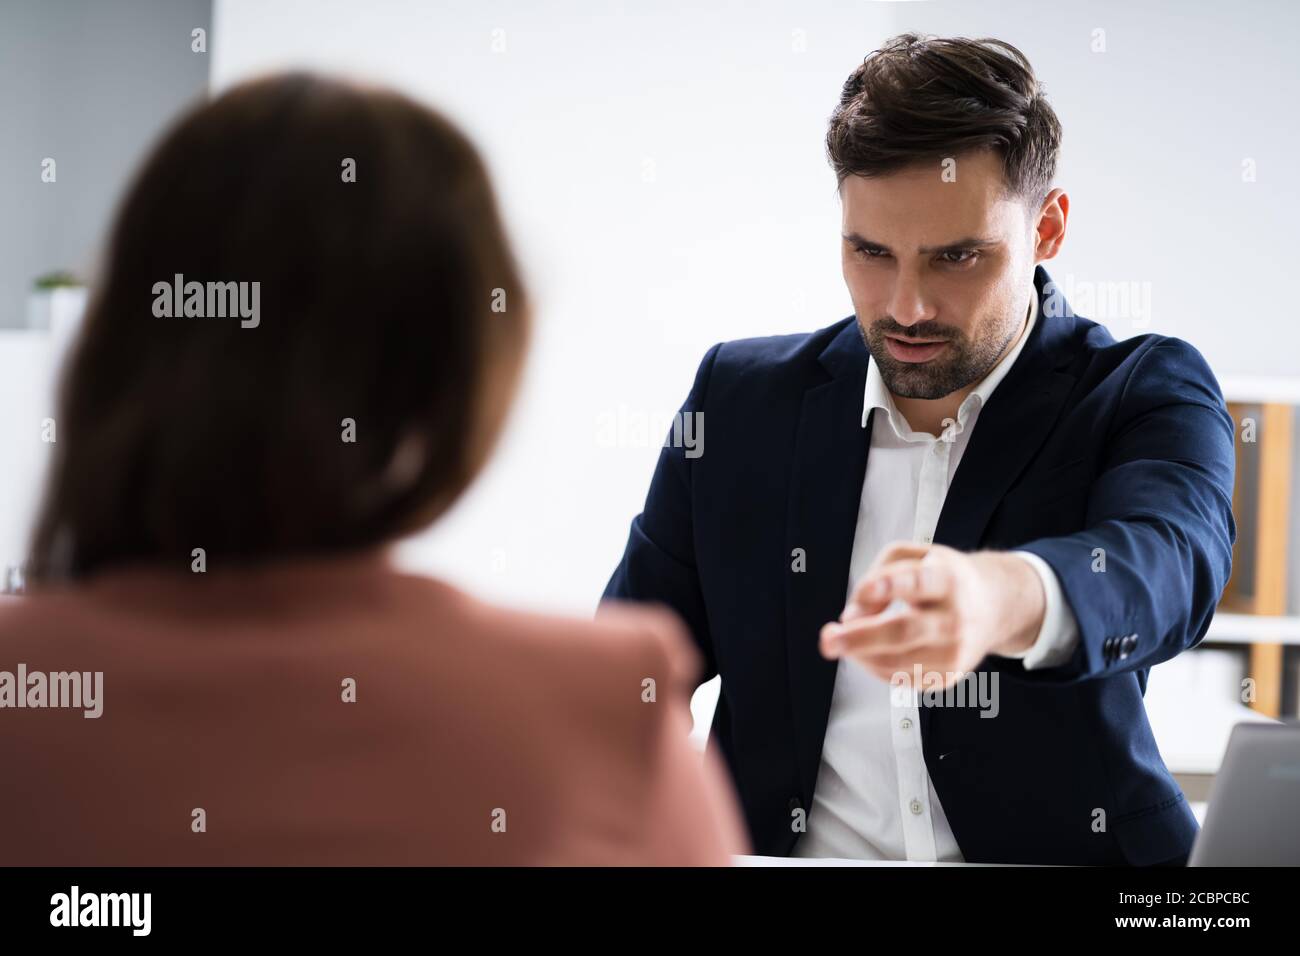 Angry Employer Bullying Unhappy Stressed Professional Employee Stock Photo